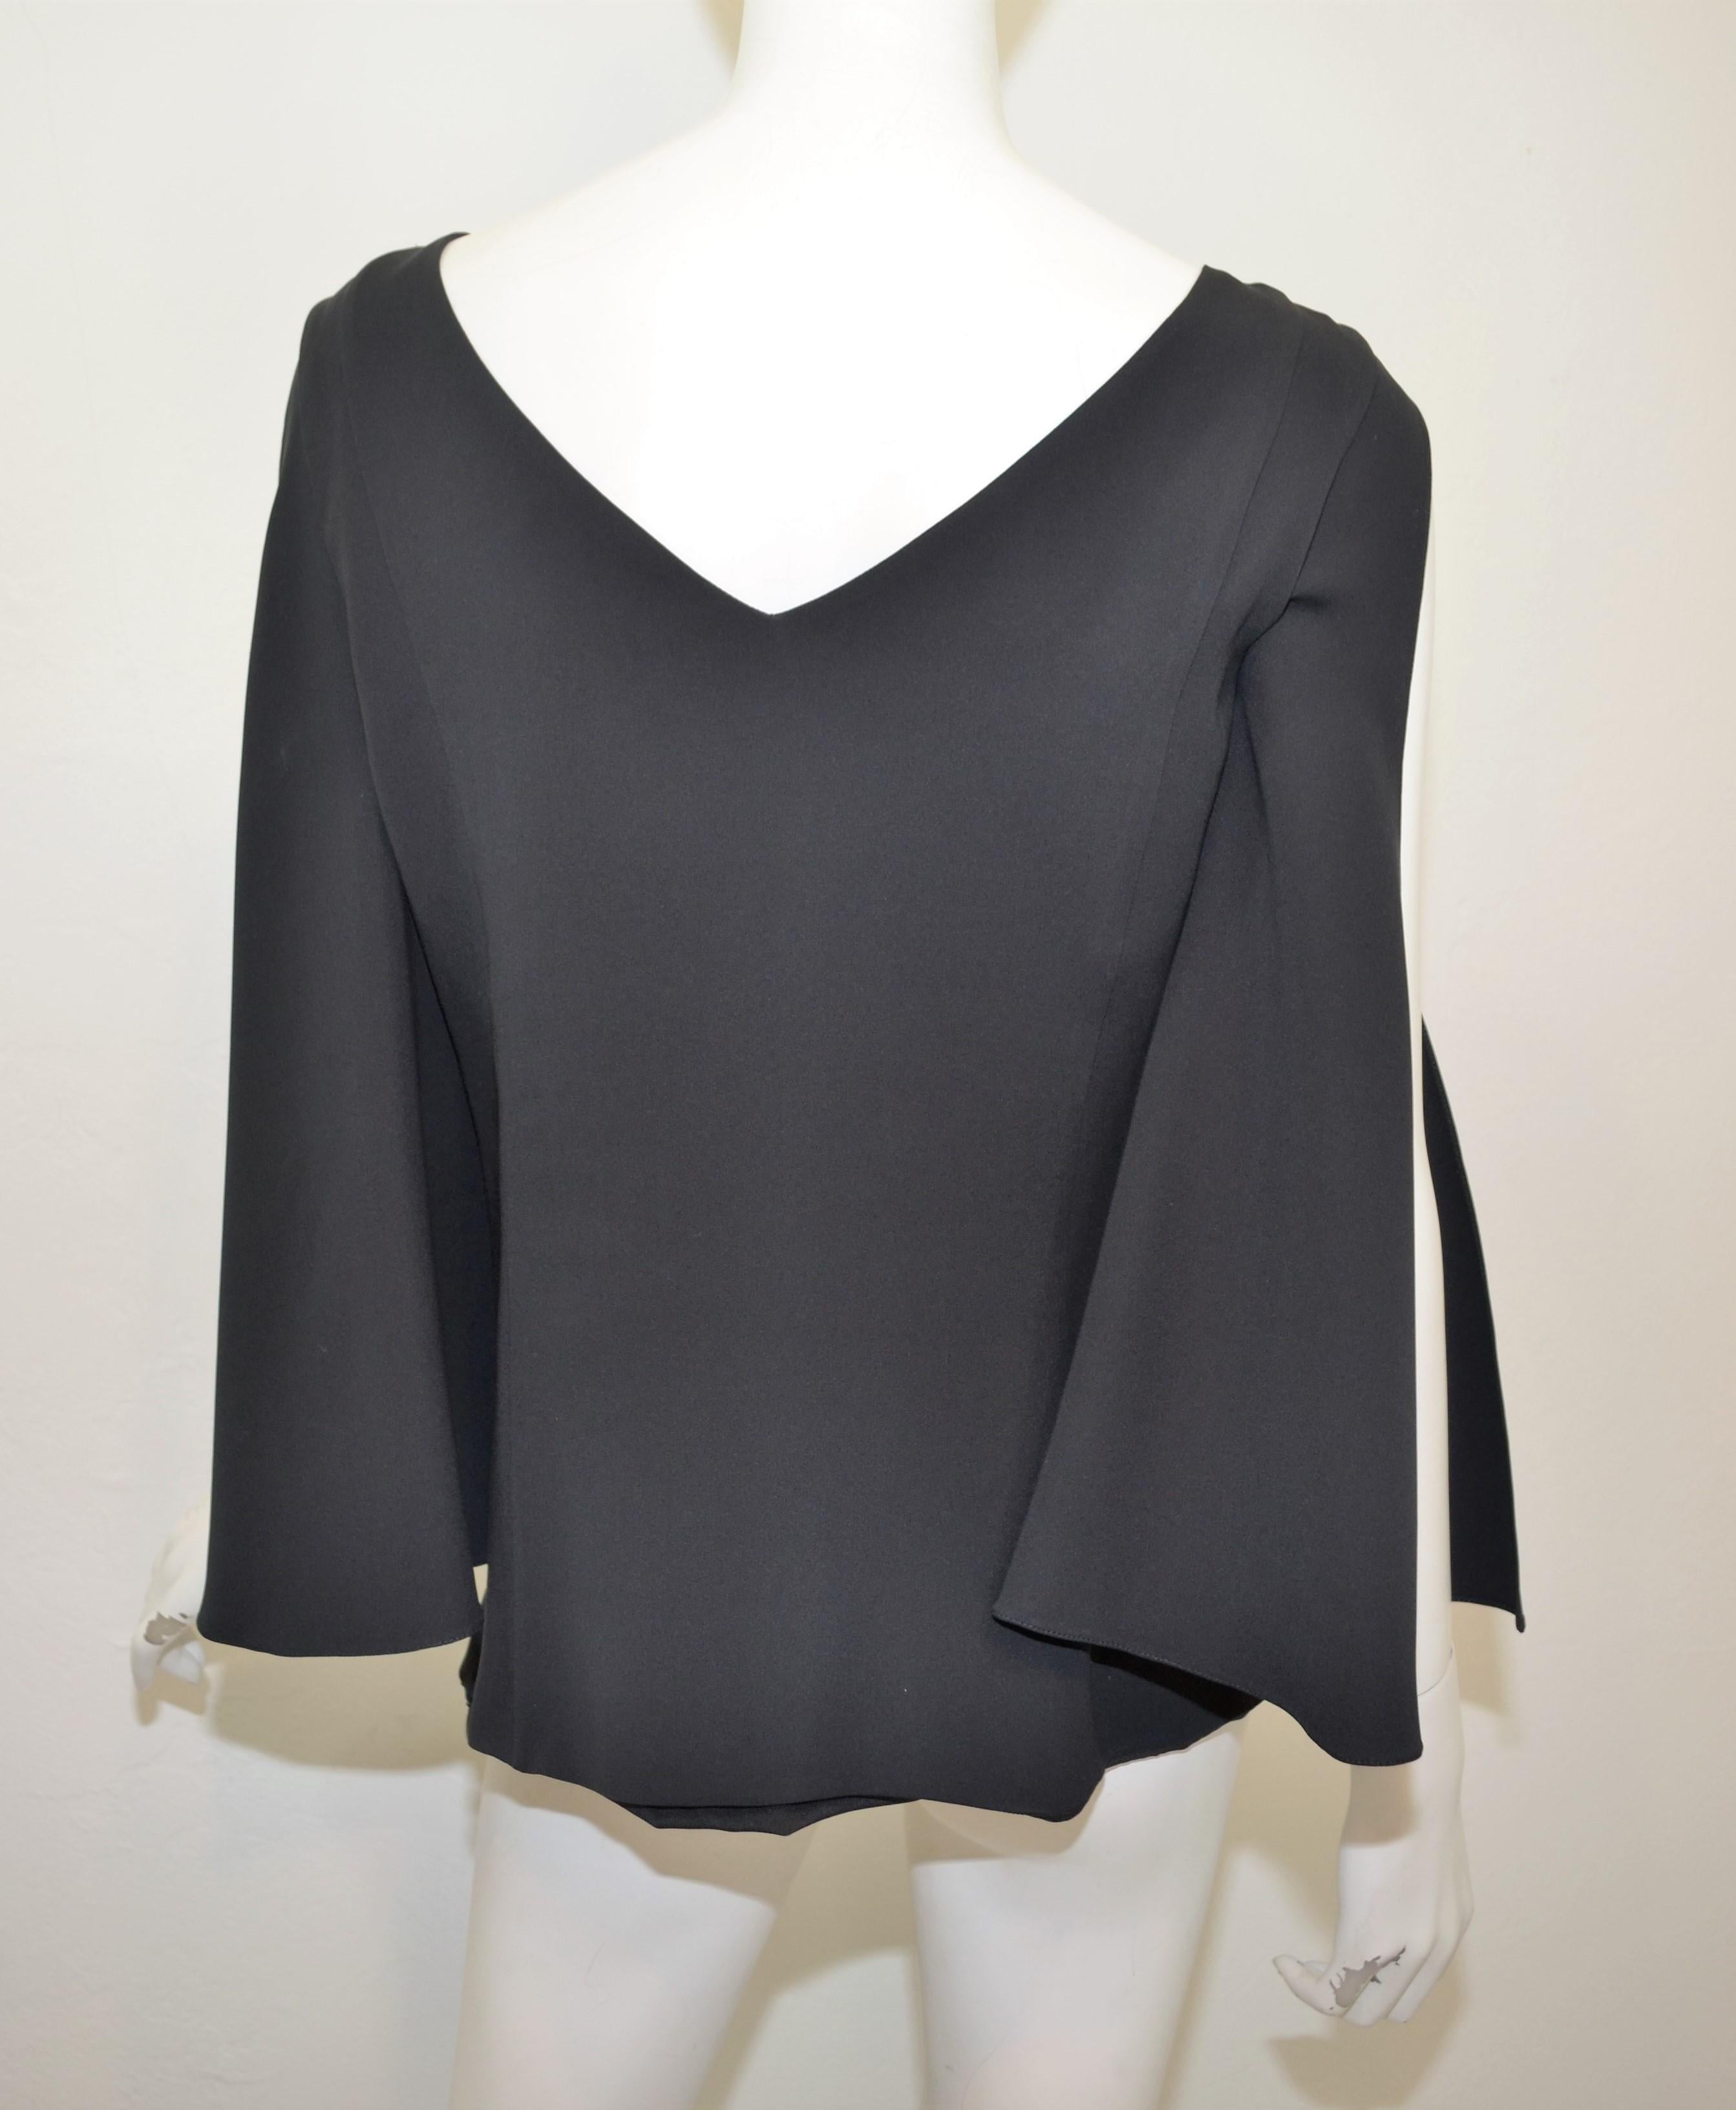 Black Christian Dior Silk Blouse with Cut Sleeves